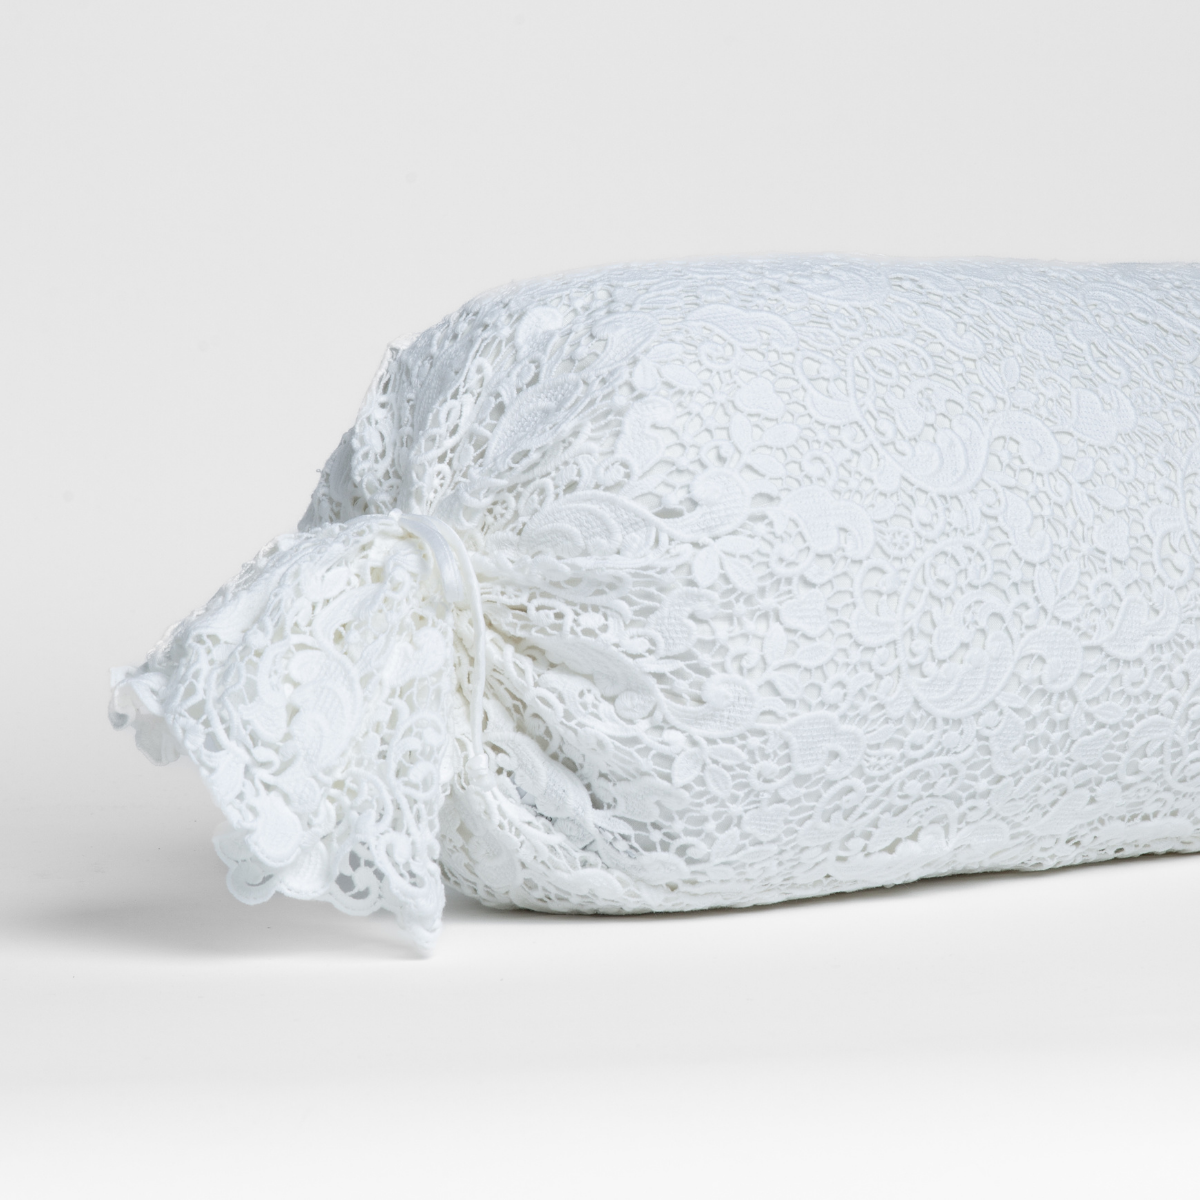 White:  one end of a lace boslter cover on a winter white liner against a white background. 